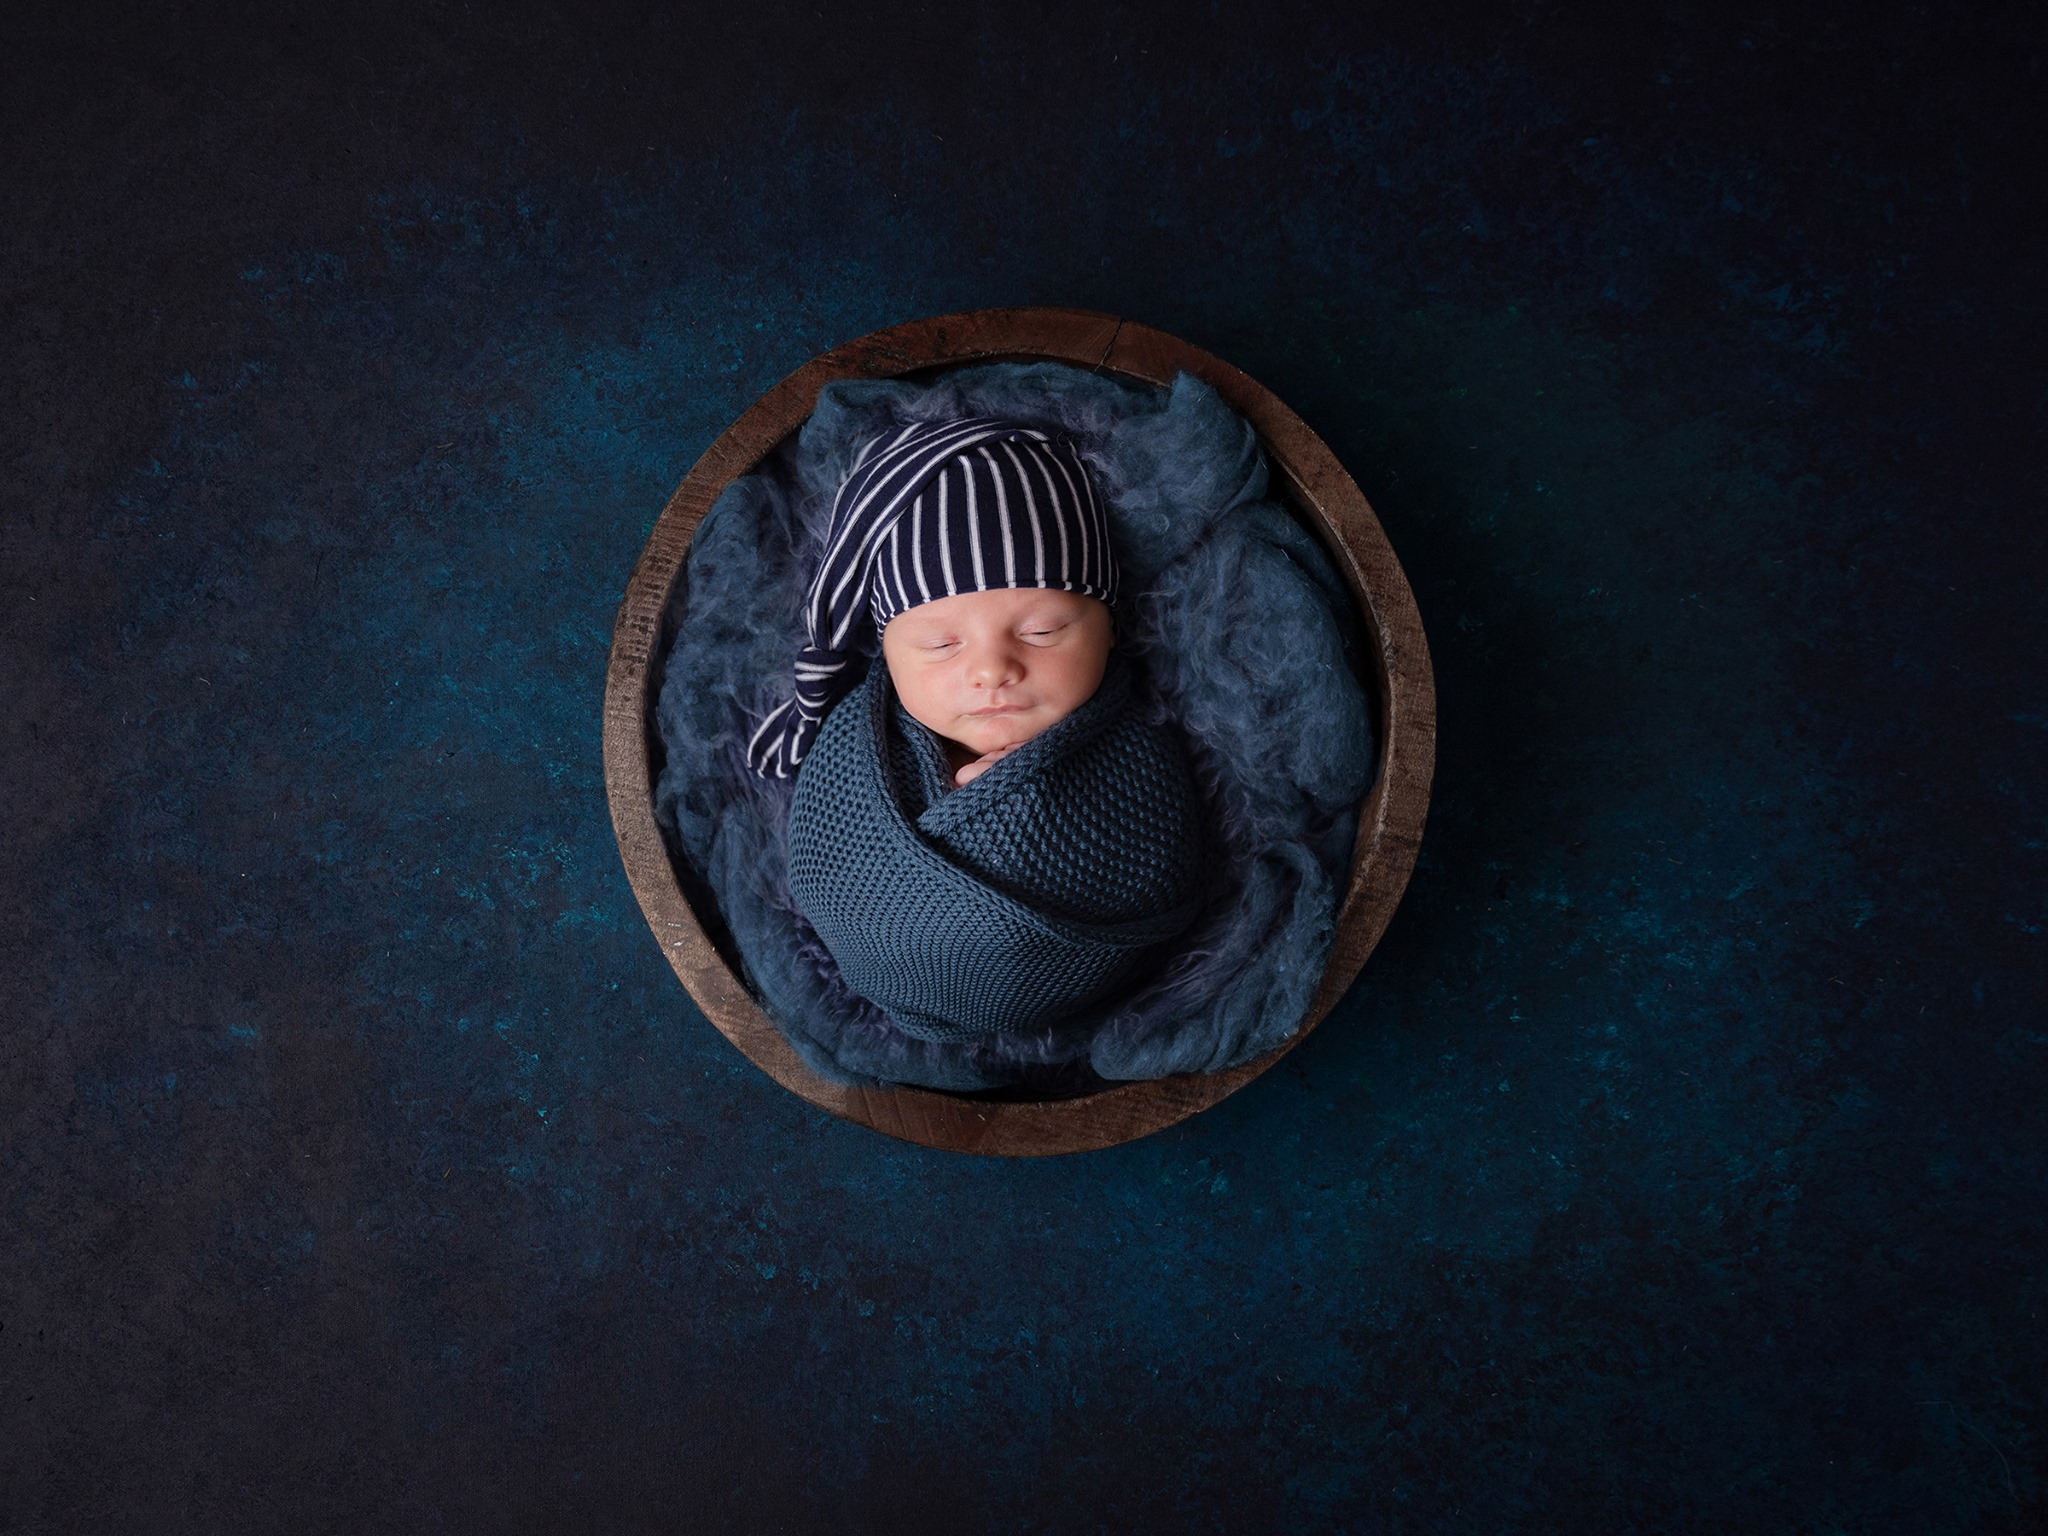 BABY PHOTOGRAPHER Hi, I am Jenifer - I am a specialist Newborn and Baby photographer based in Brockford, Suffolk.